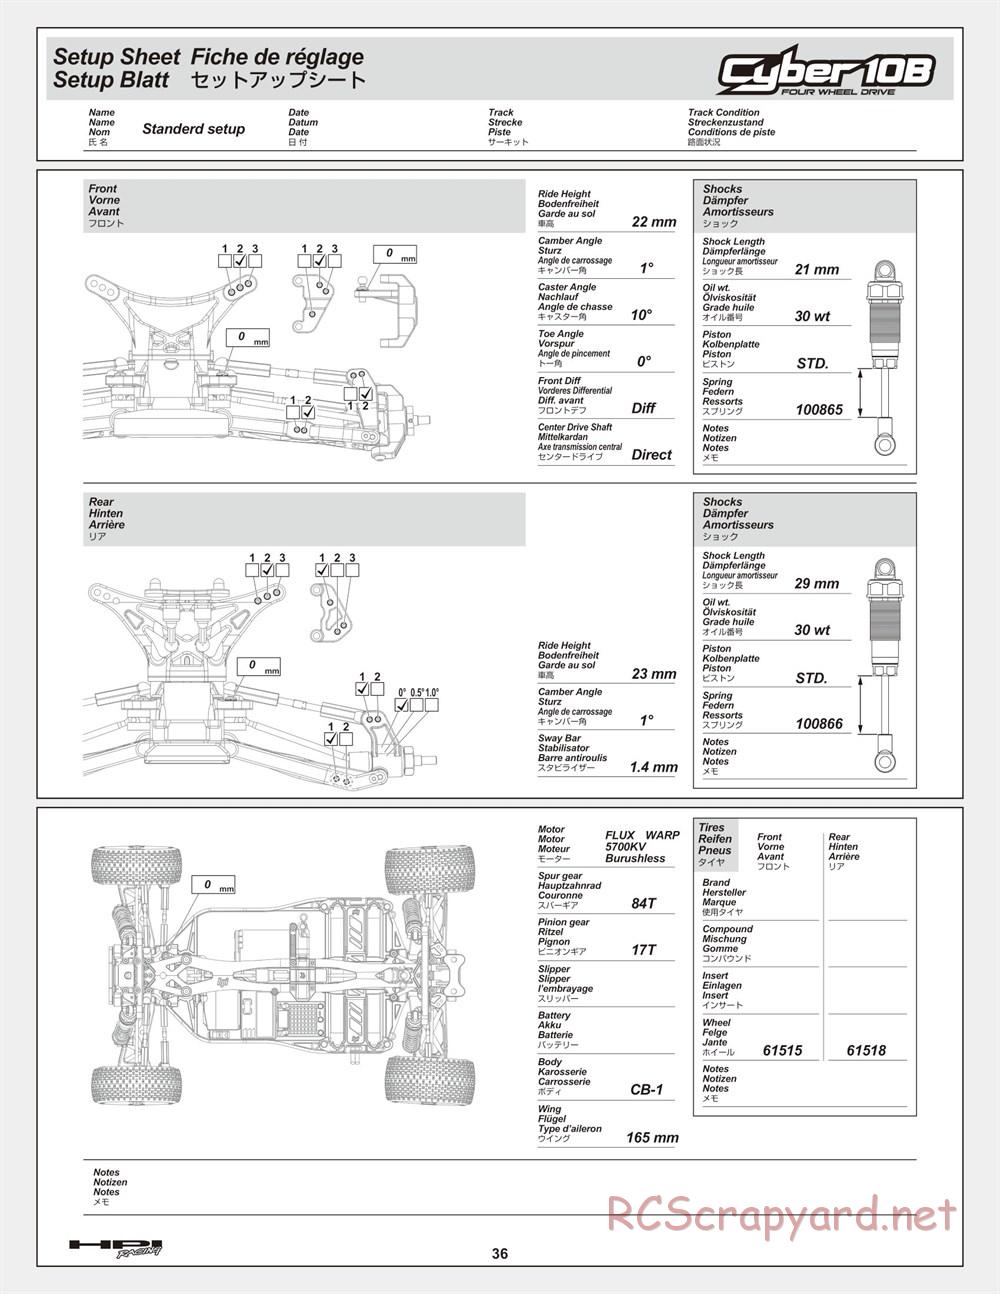 HPI - Cyber 10B - Manual - Page 36